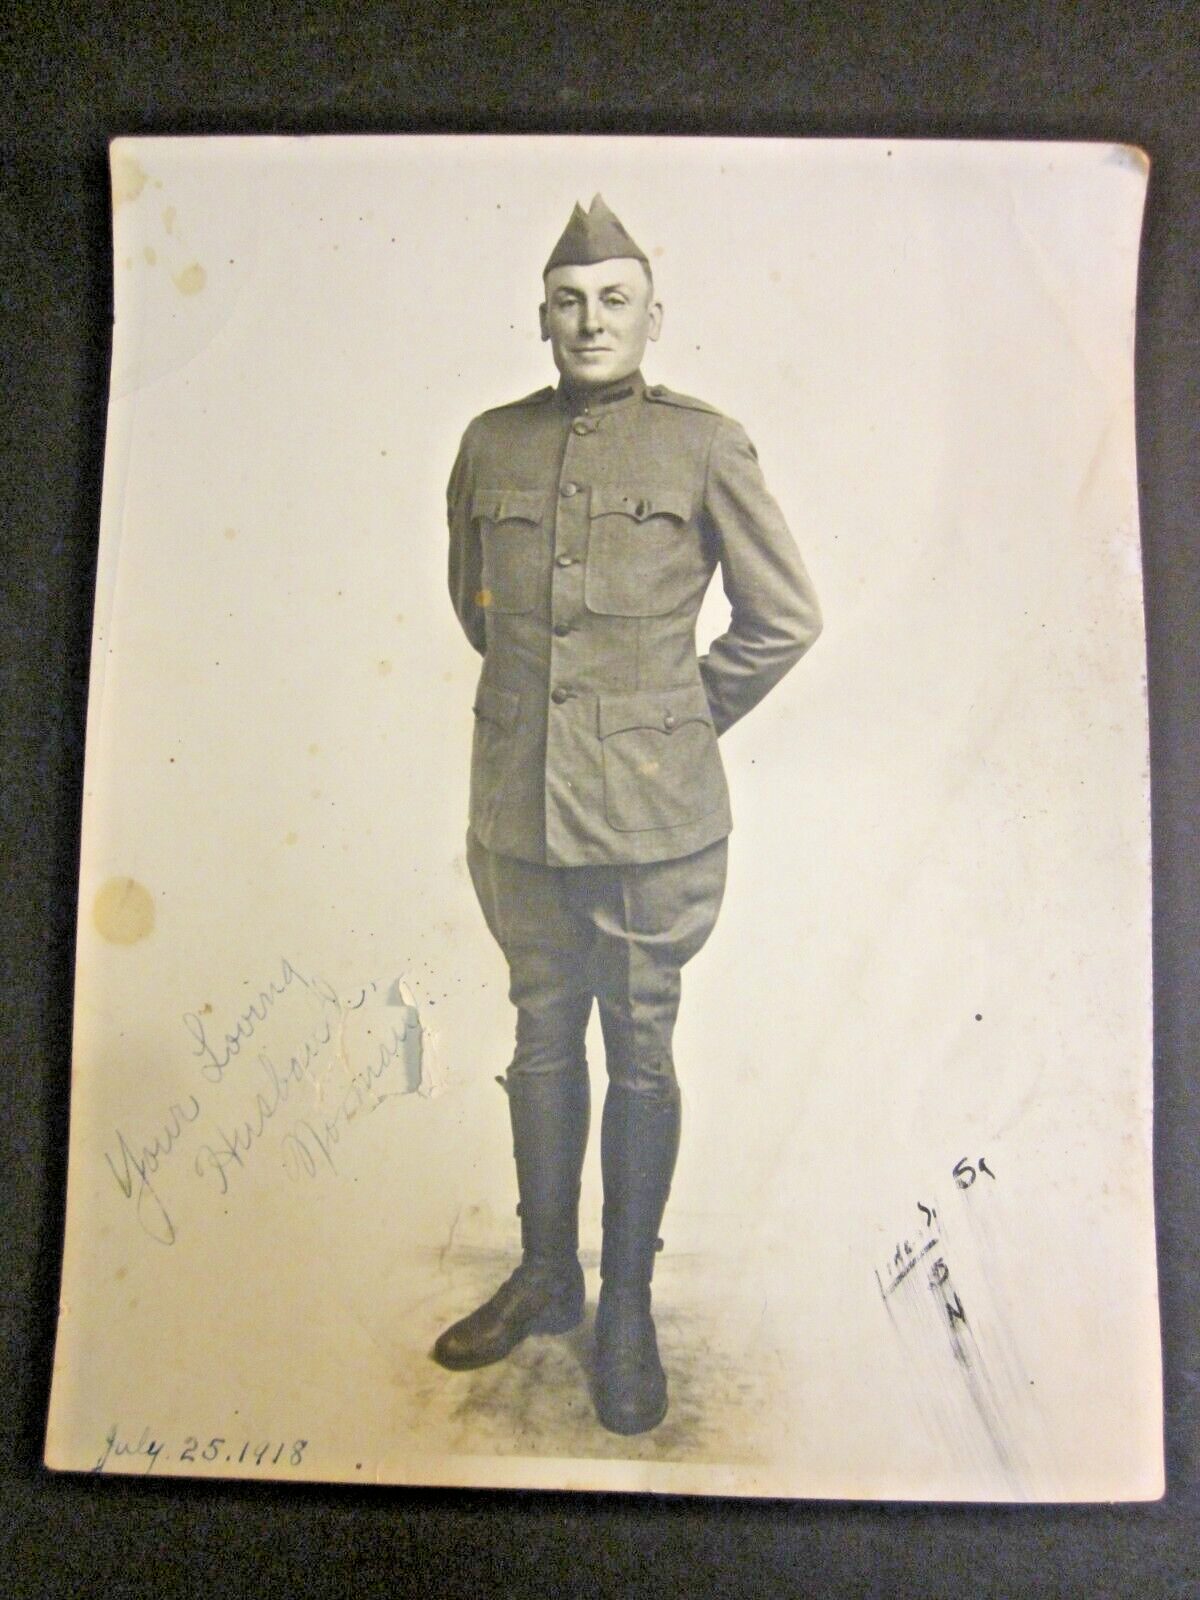 World War I Soldier Photograph  Looks Original  Inscribed  Dated July 25 1918